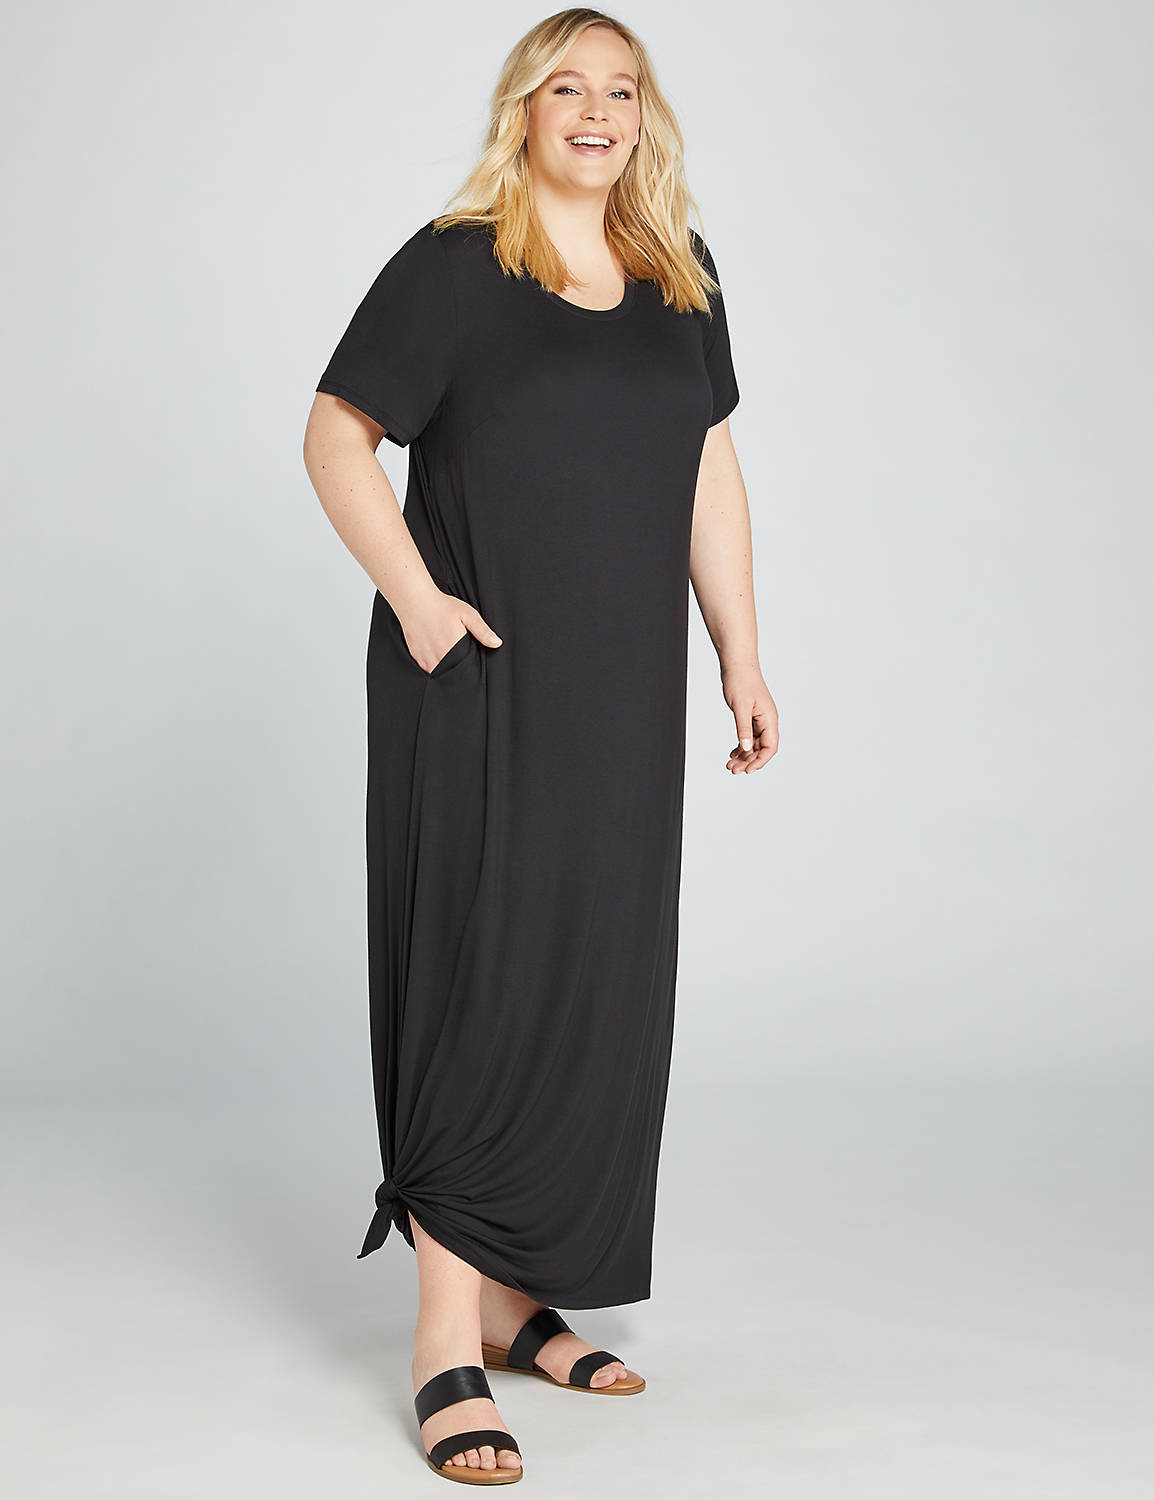 1111598 SH CREW NECK SIDE TIE MIDI - SOLID:Pitch Black LB 1000322:14/16 Product Image 1